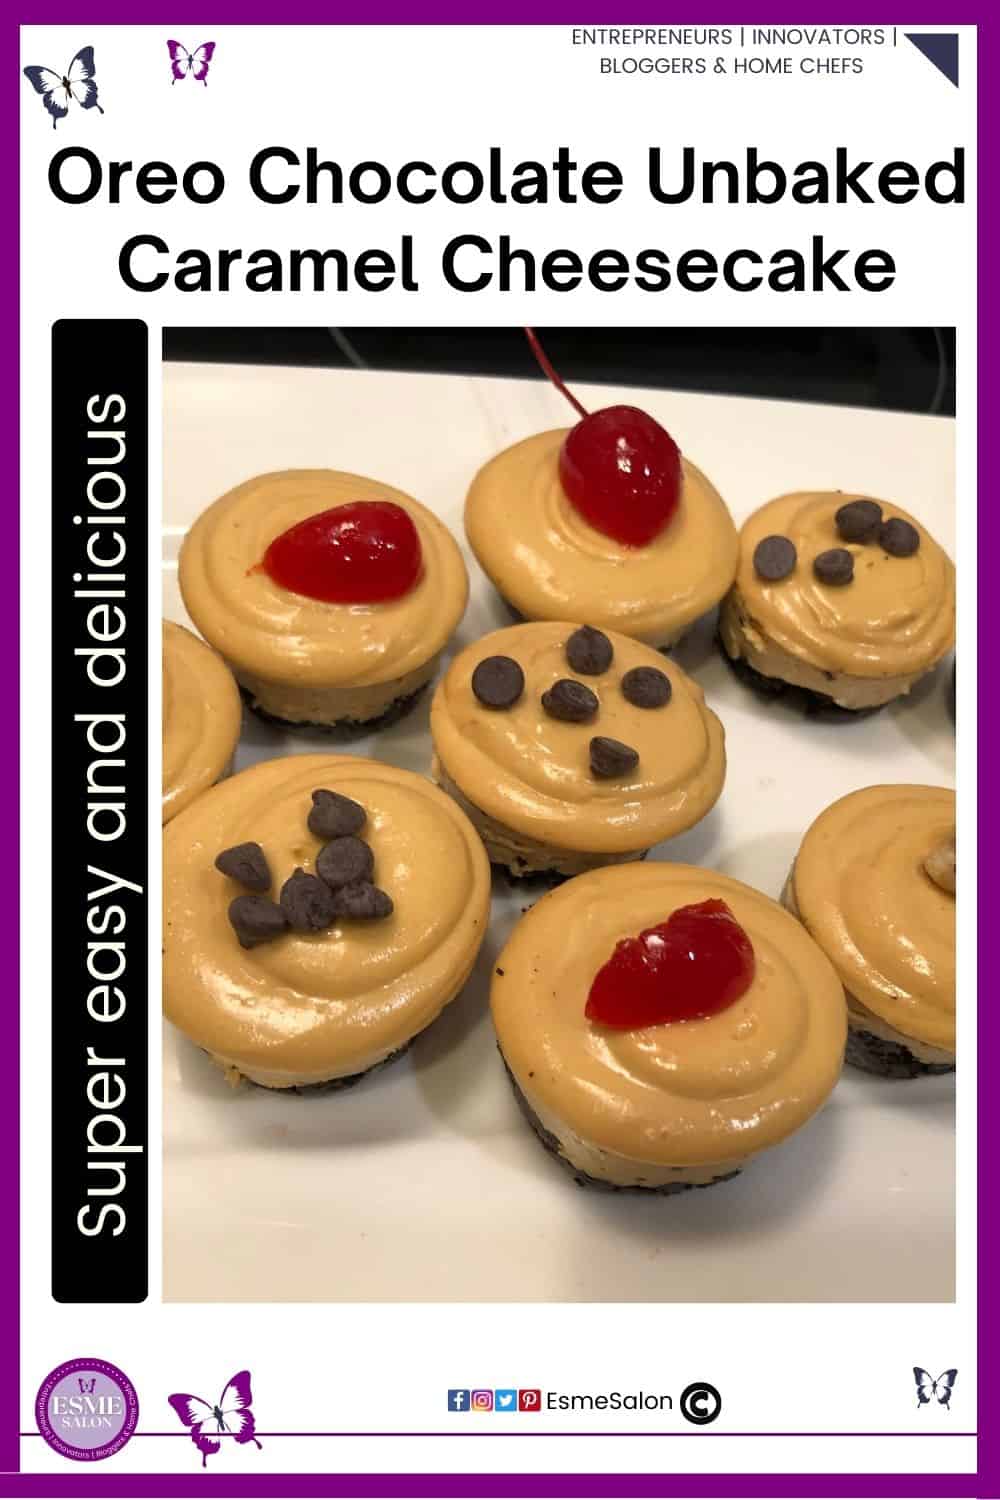 an image of small single serving Chocolate Oreo Unbaked Caramel Cheesecakes with cherries and chocolate morsel decoration